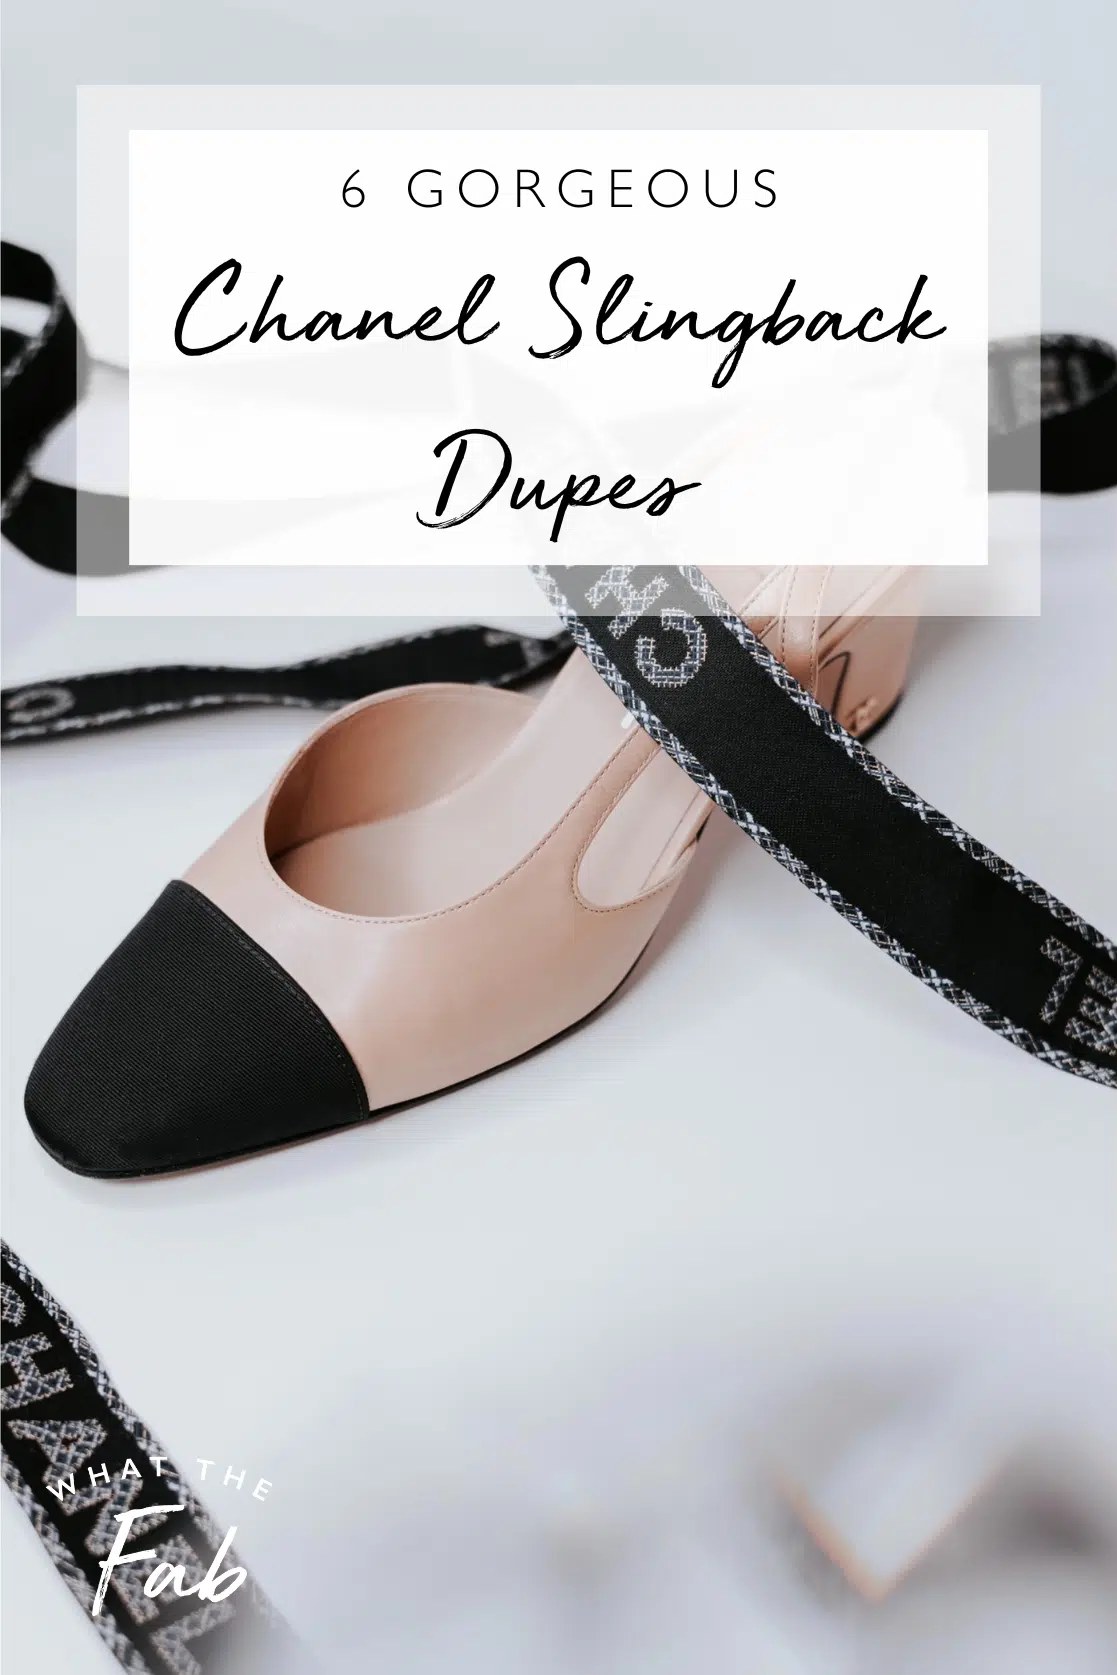 chanel pointed toe slingback